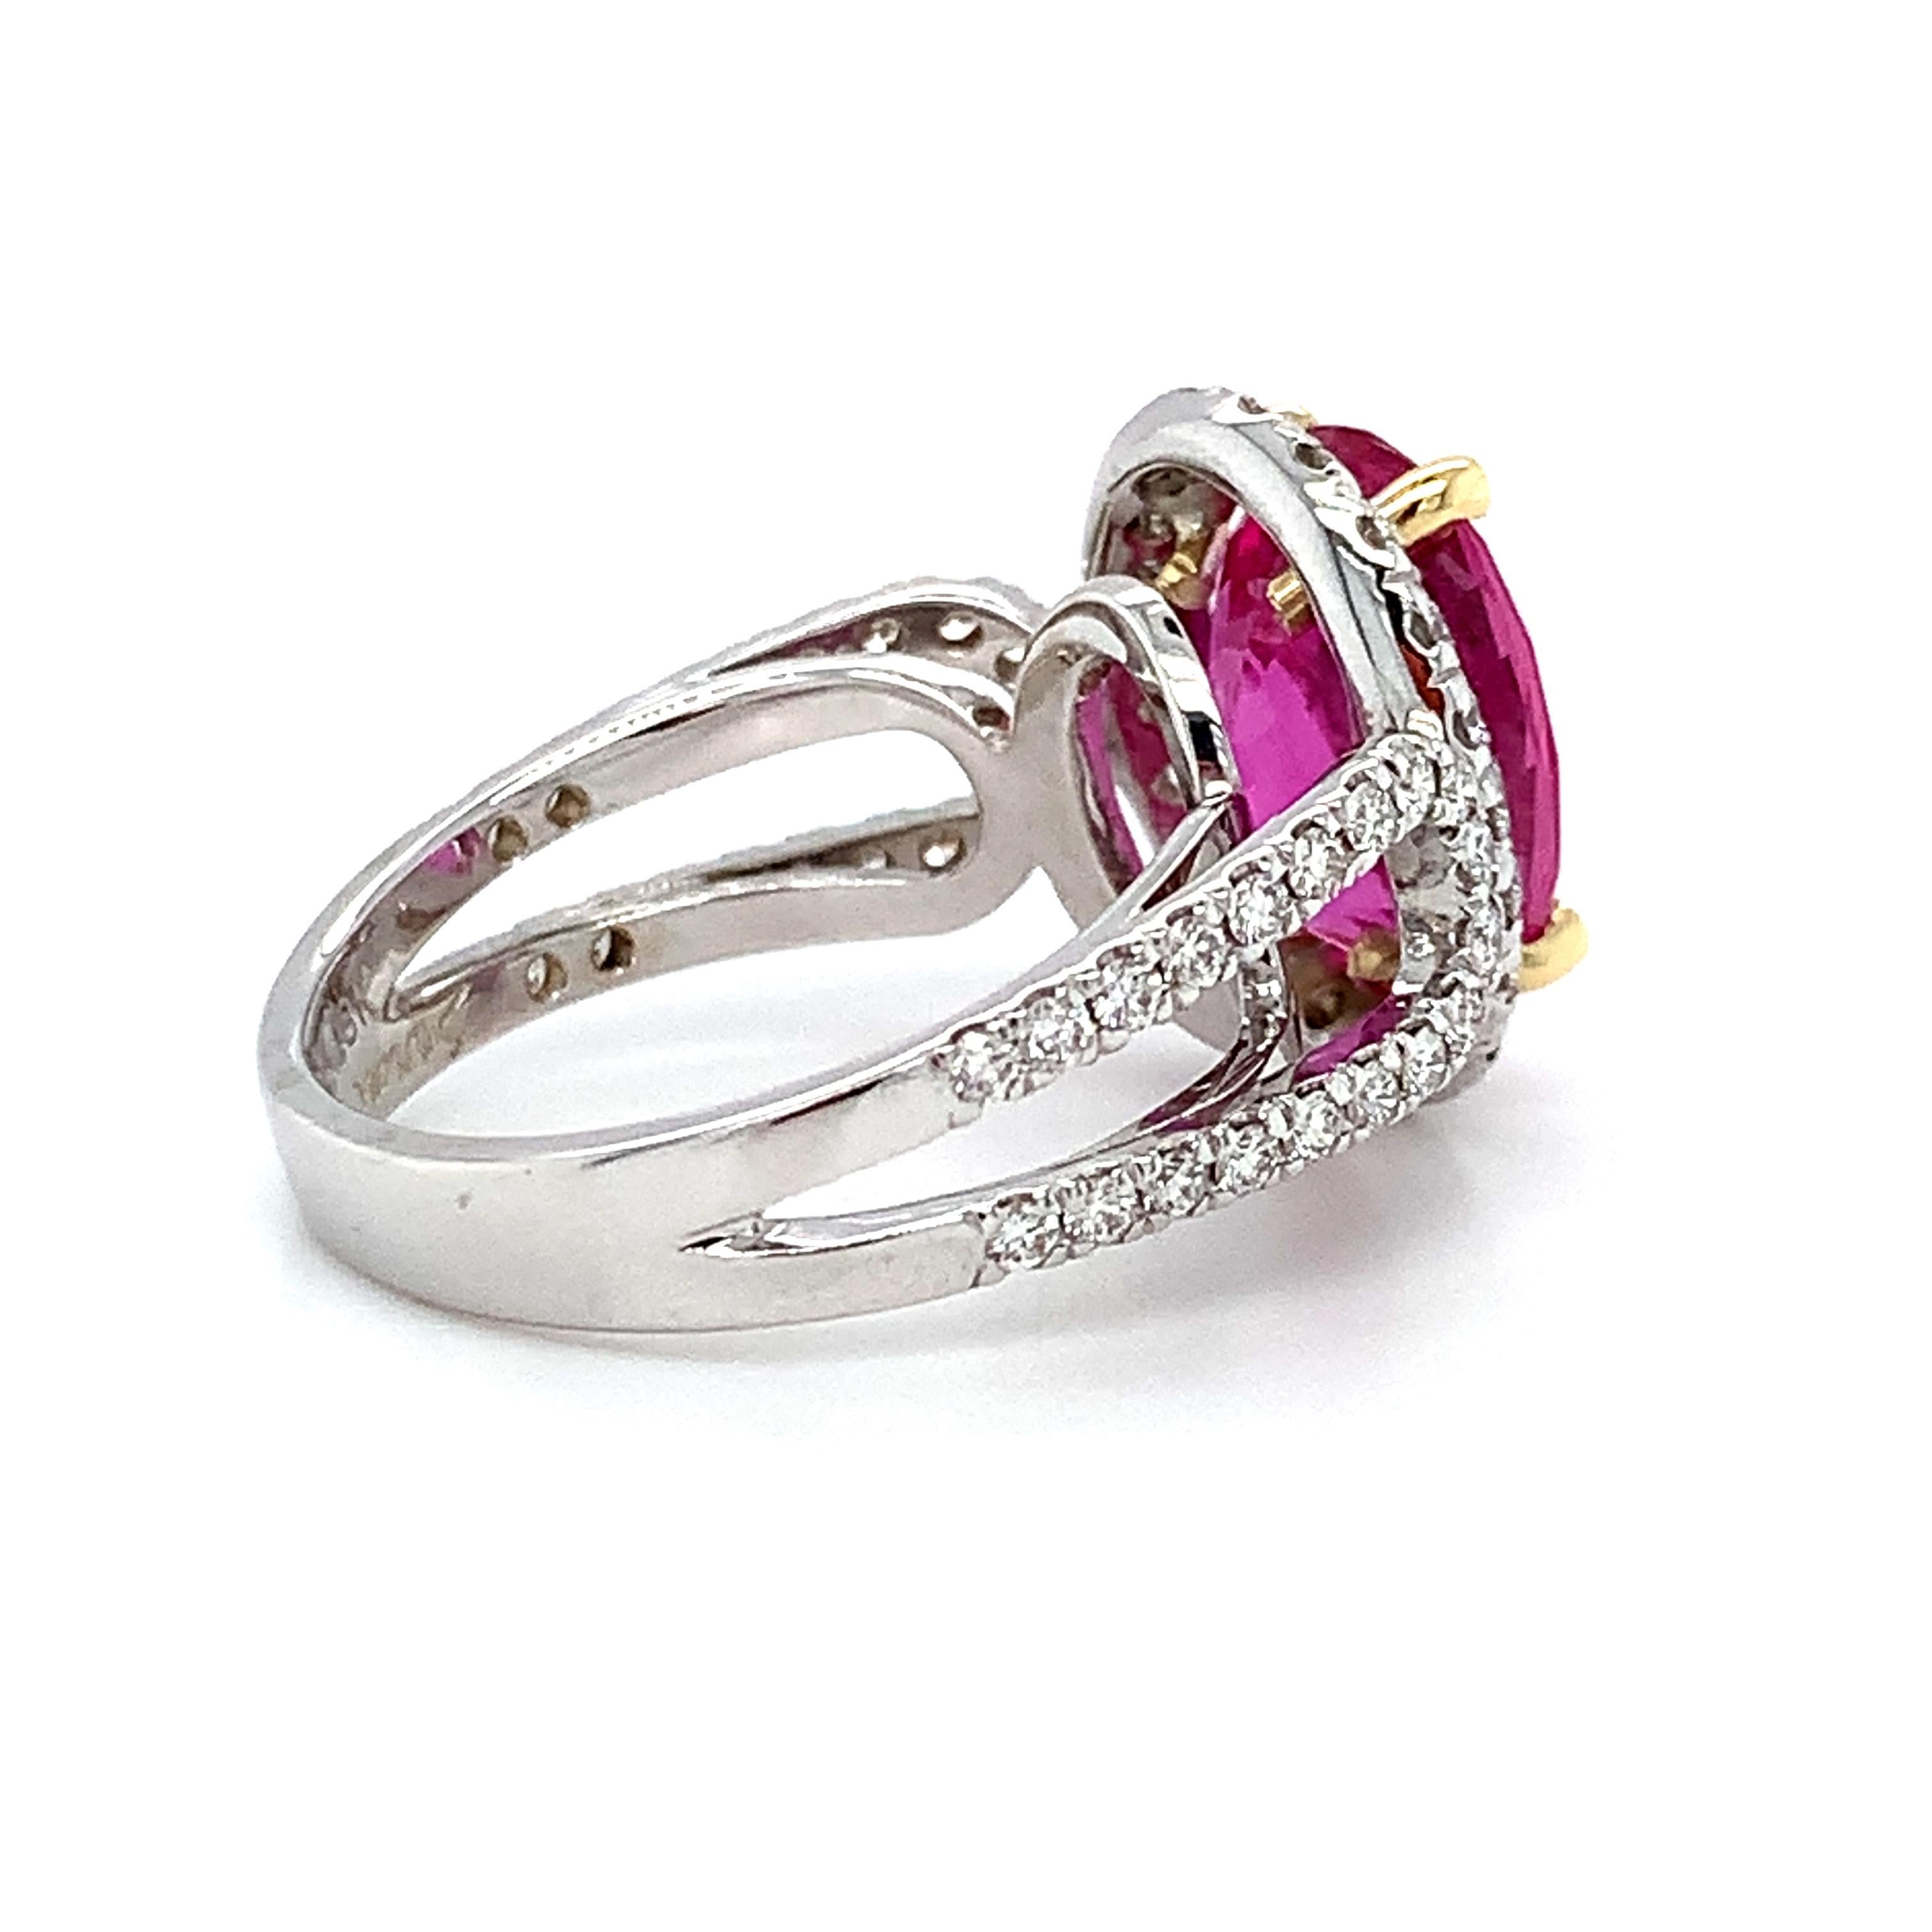 GIA Certified Unheated 5.73 Carat Pink Sapphire and Diamond Cocktail Ring For Sale 2